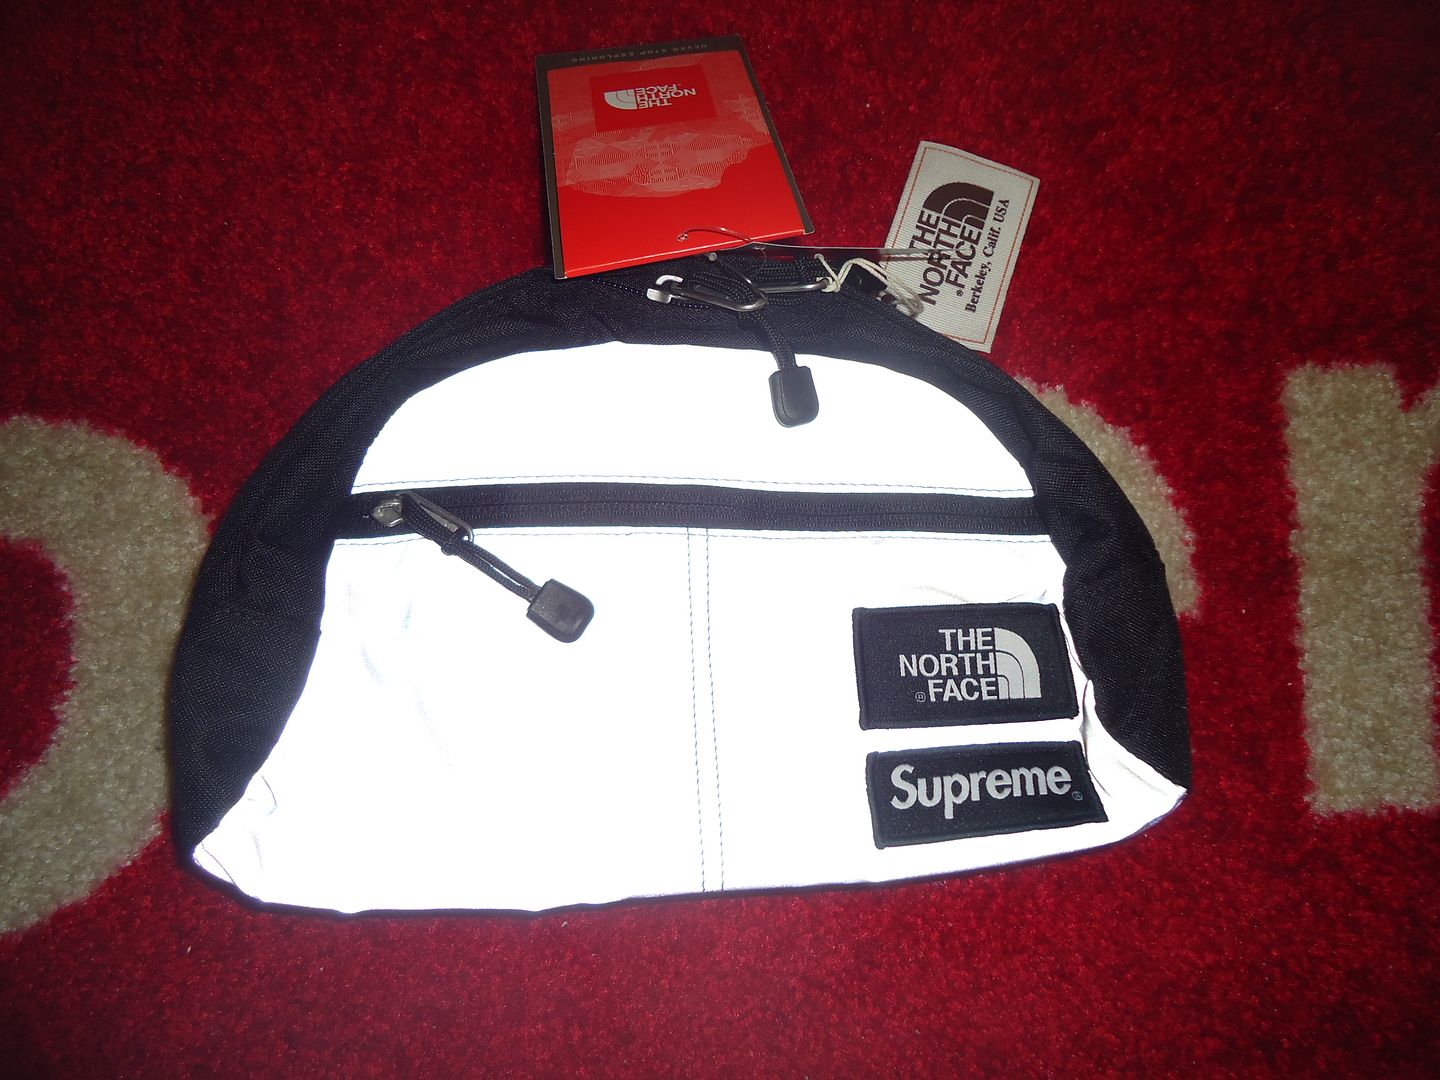 SUPREME 2013 S/S NORTH FACE REFLECTIVE 3 M ROO II WAIST FANNY SHOULDER